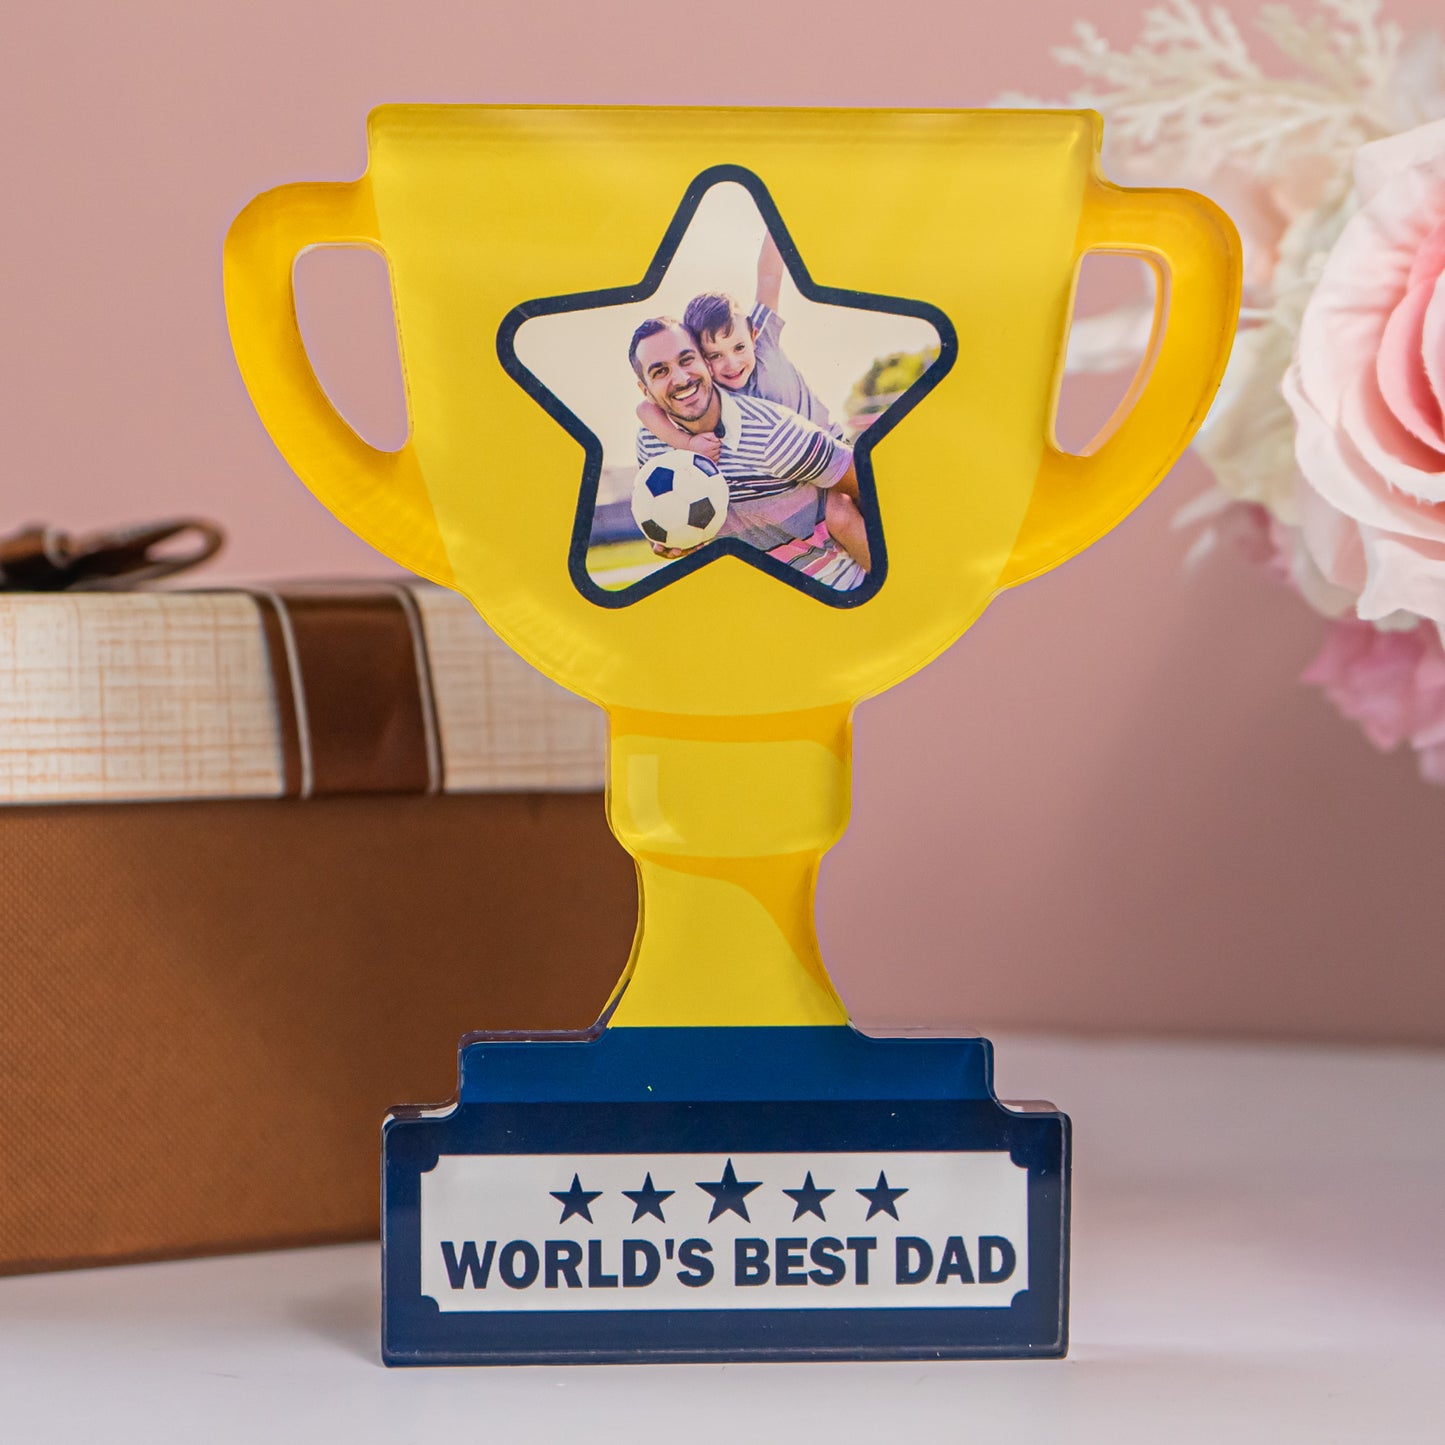 World's Best Dad - Personalized Acrylic Photo Plaque